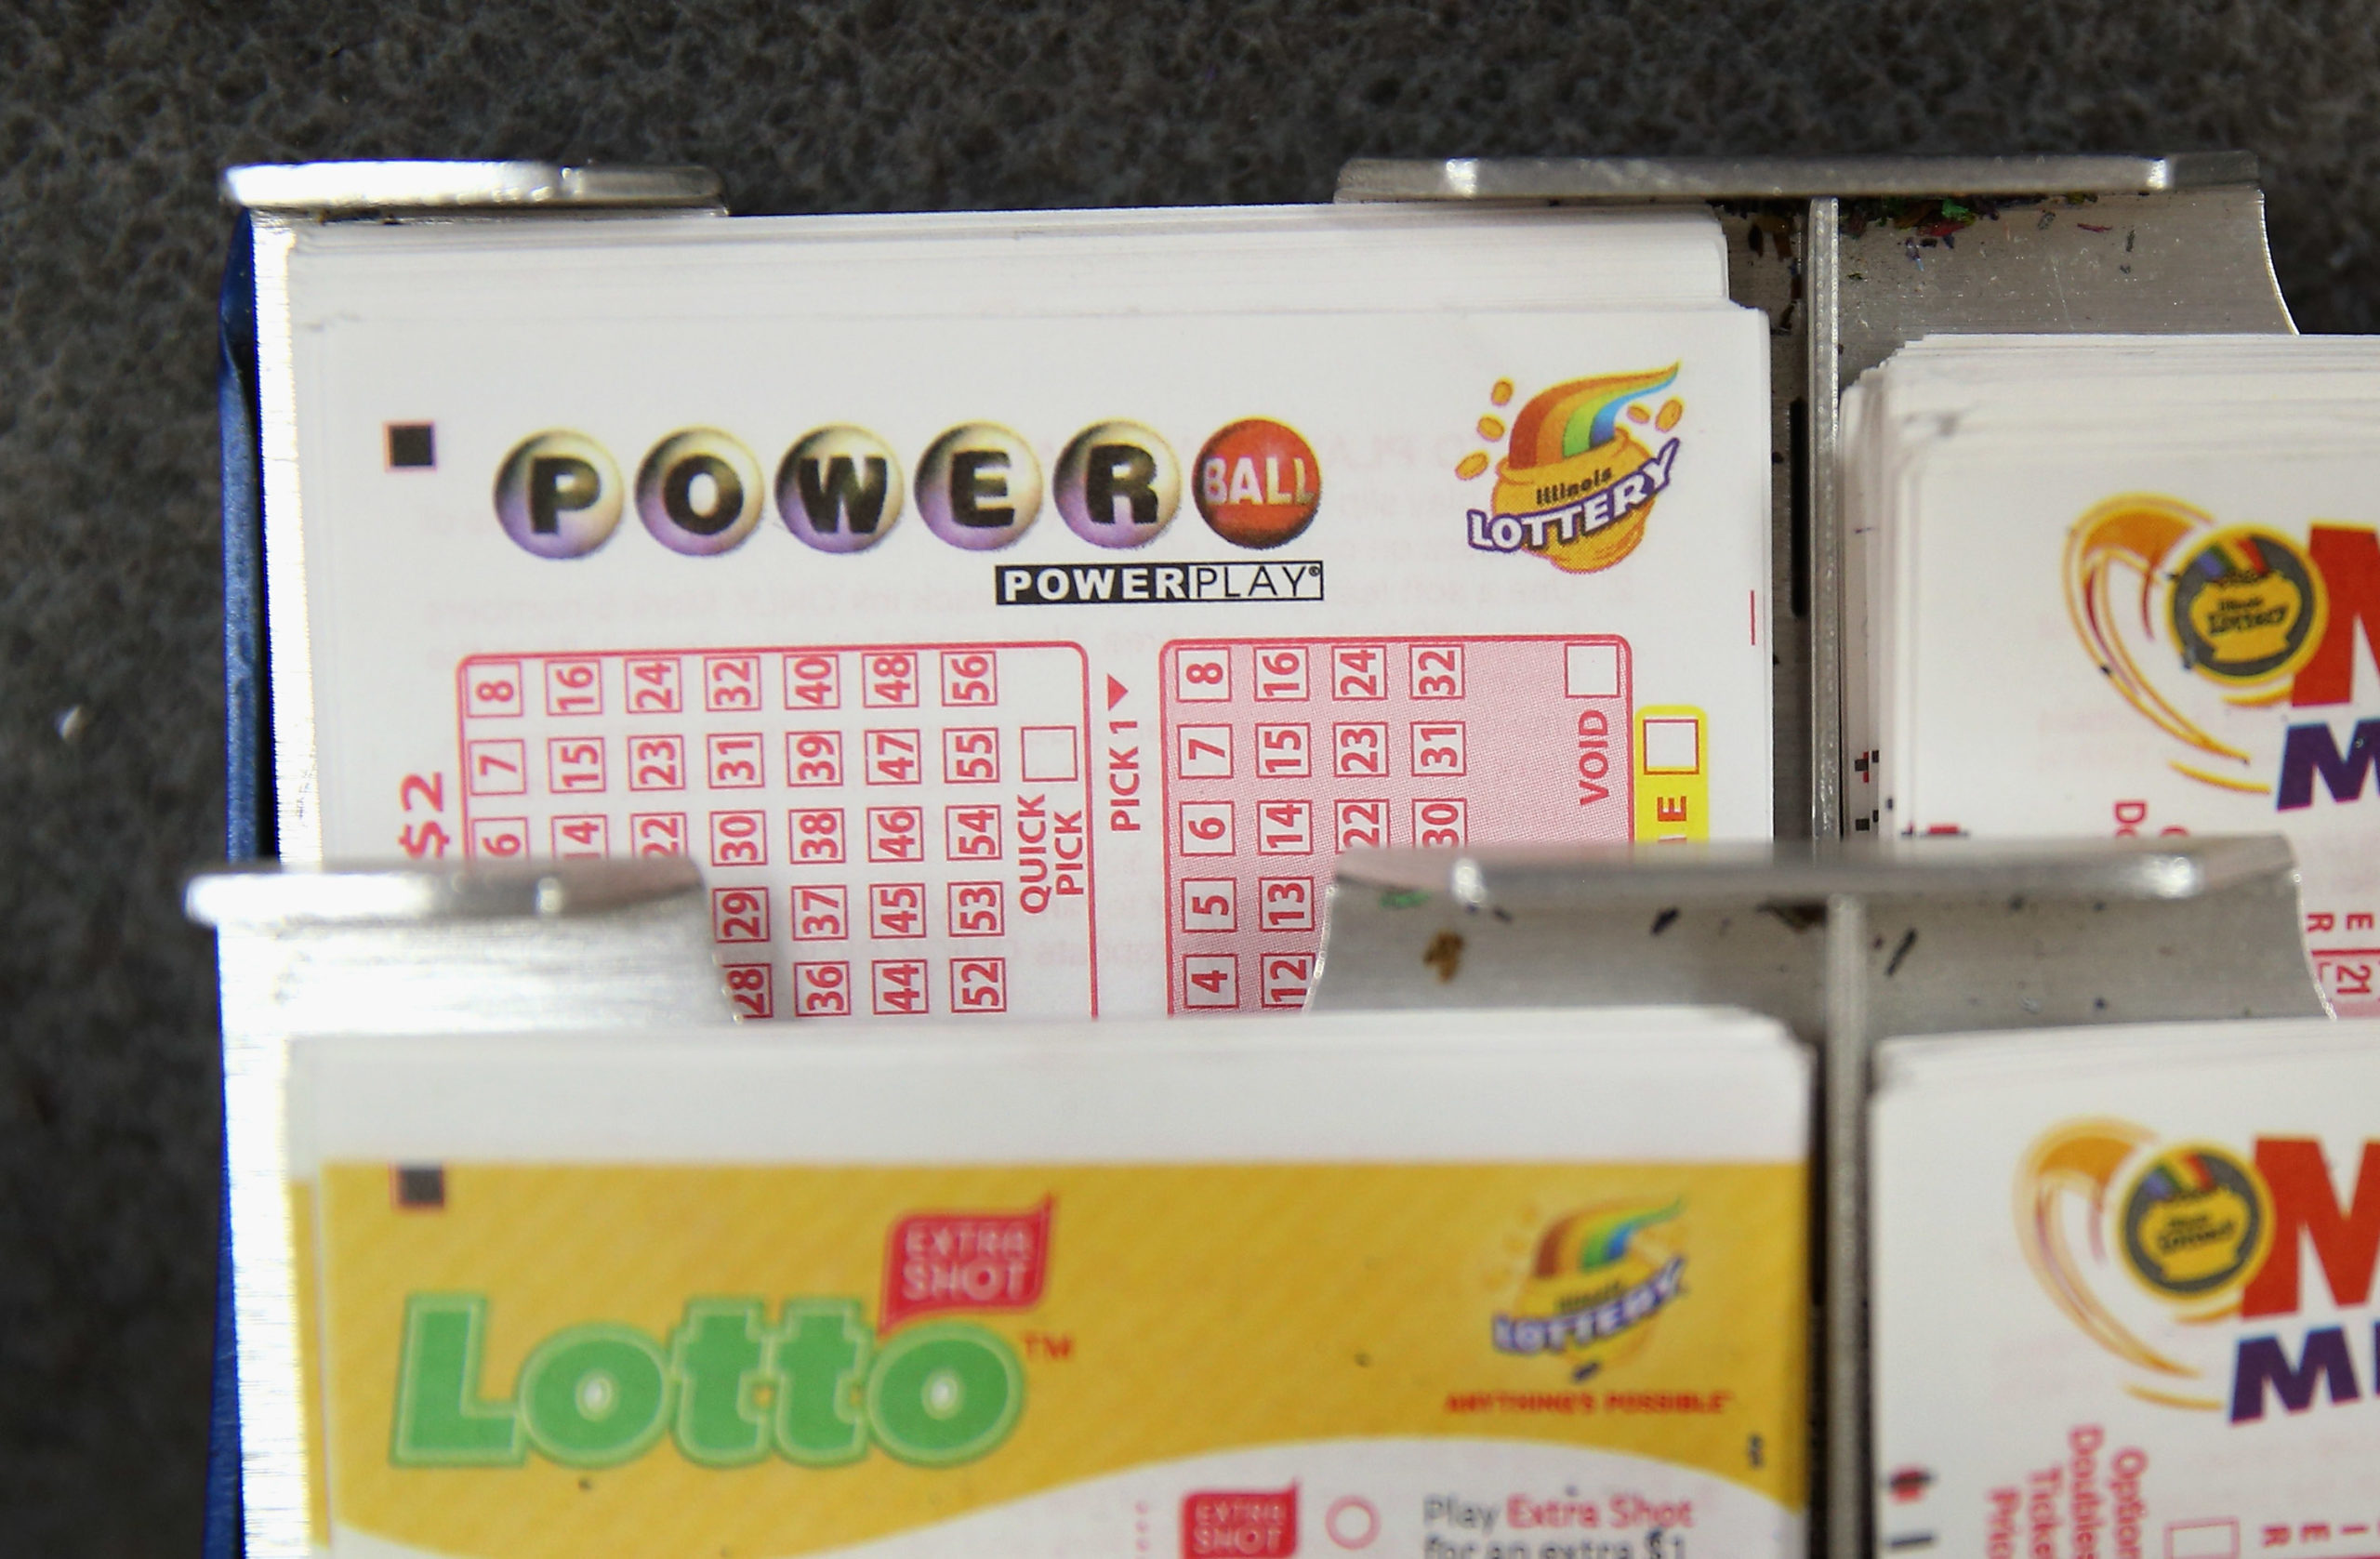 CHICAGO, IL - AUGUST 07: Cards used to select Powerball and other lottery numbers sit on the counter at a 7-Eleven store on August 7, 2013 in Chicago, Illinois. The Powerball jackpot for tonight's drawing is $425 million, the third-highest total ever. (Photo by Scott Olson/Getty Images)